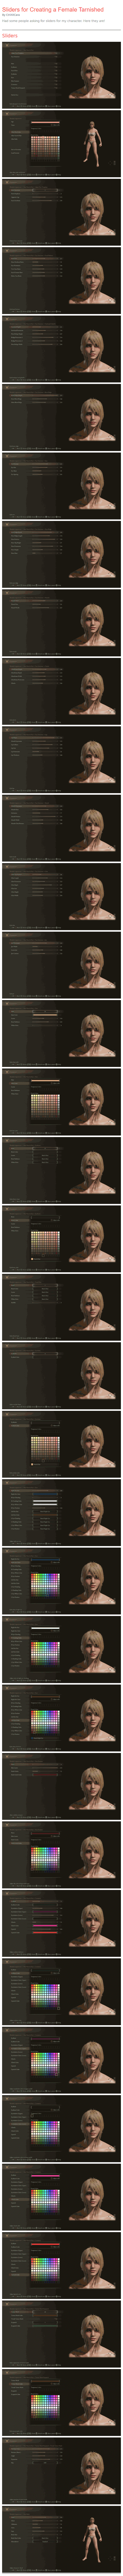 Sliders for Creating a Female Tarnished By CtrlAltCara Had some people asking for sliders for my character. Here they are! Sliders